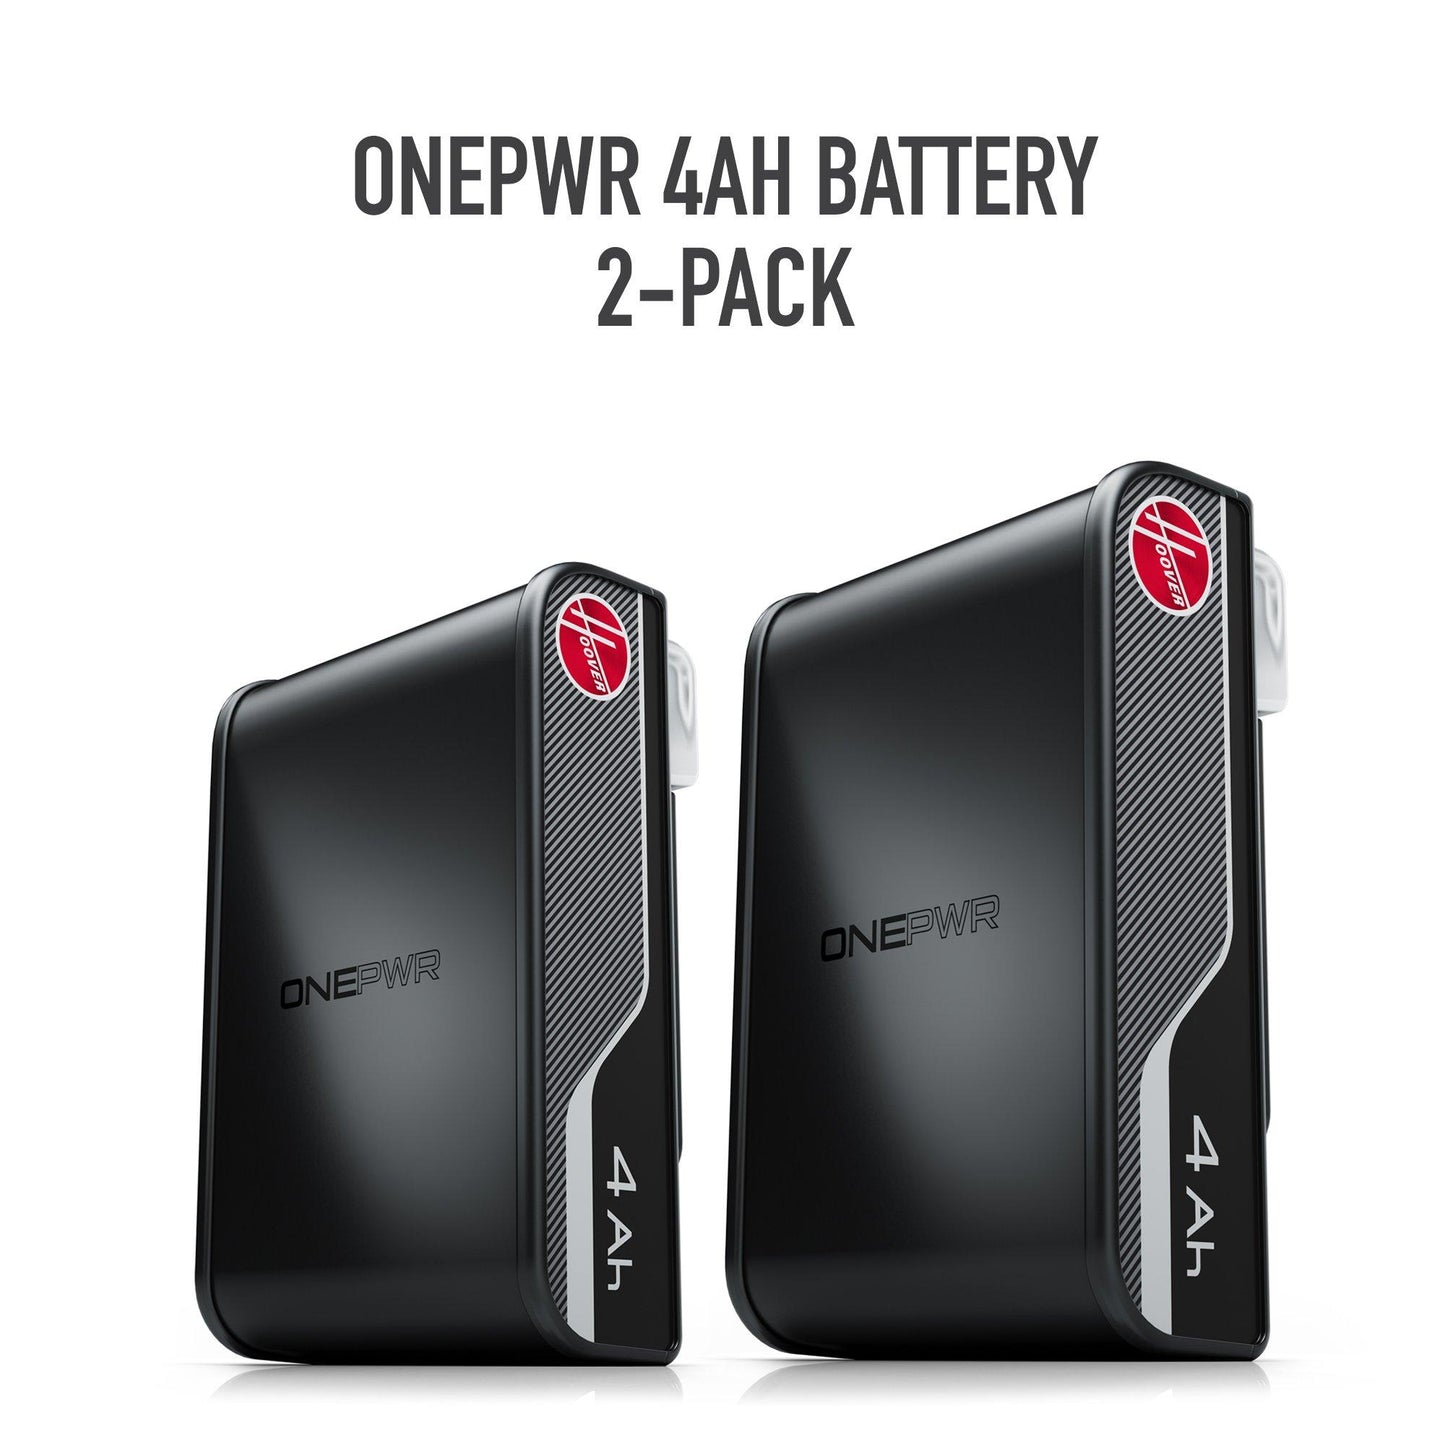 ONEPWR 4Ah Battery (Two-Pack)